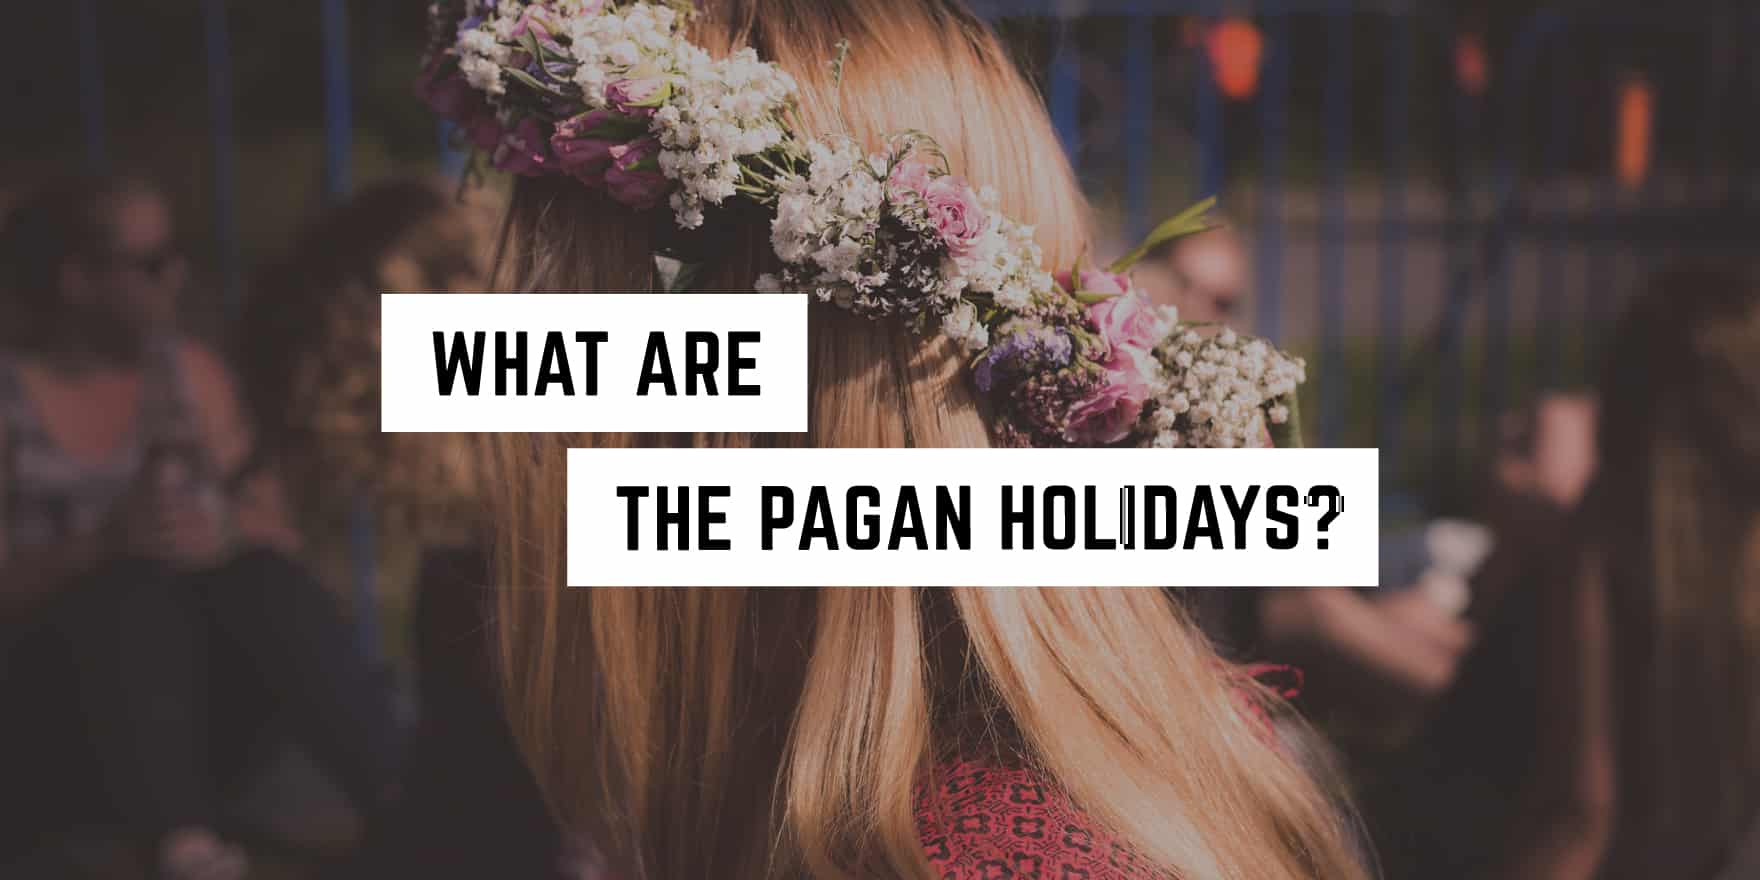 A woman adorned with a floral crown at a gathering, with a text overlay asking 'what are the pagan holidays?', radiates the allure of new age products.